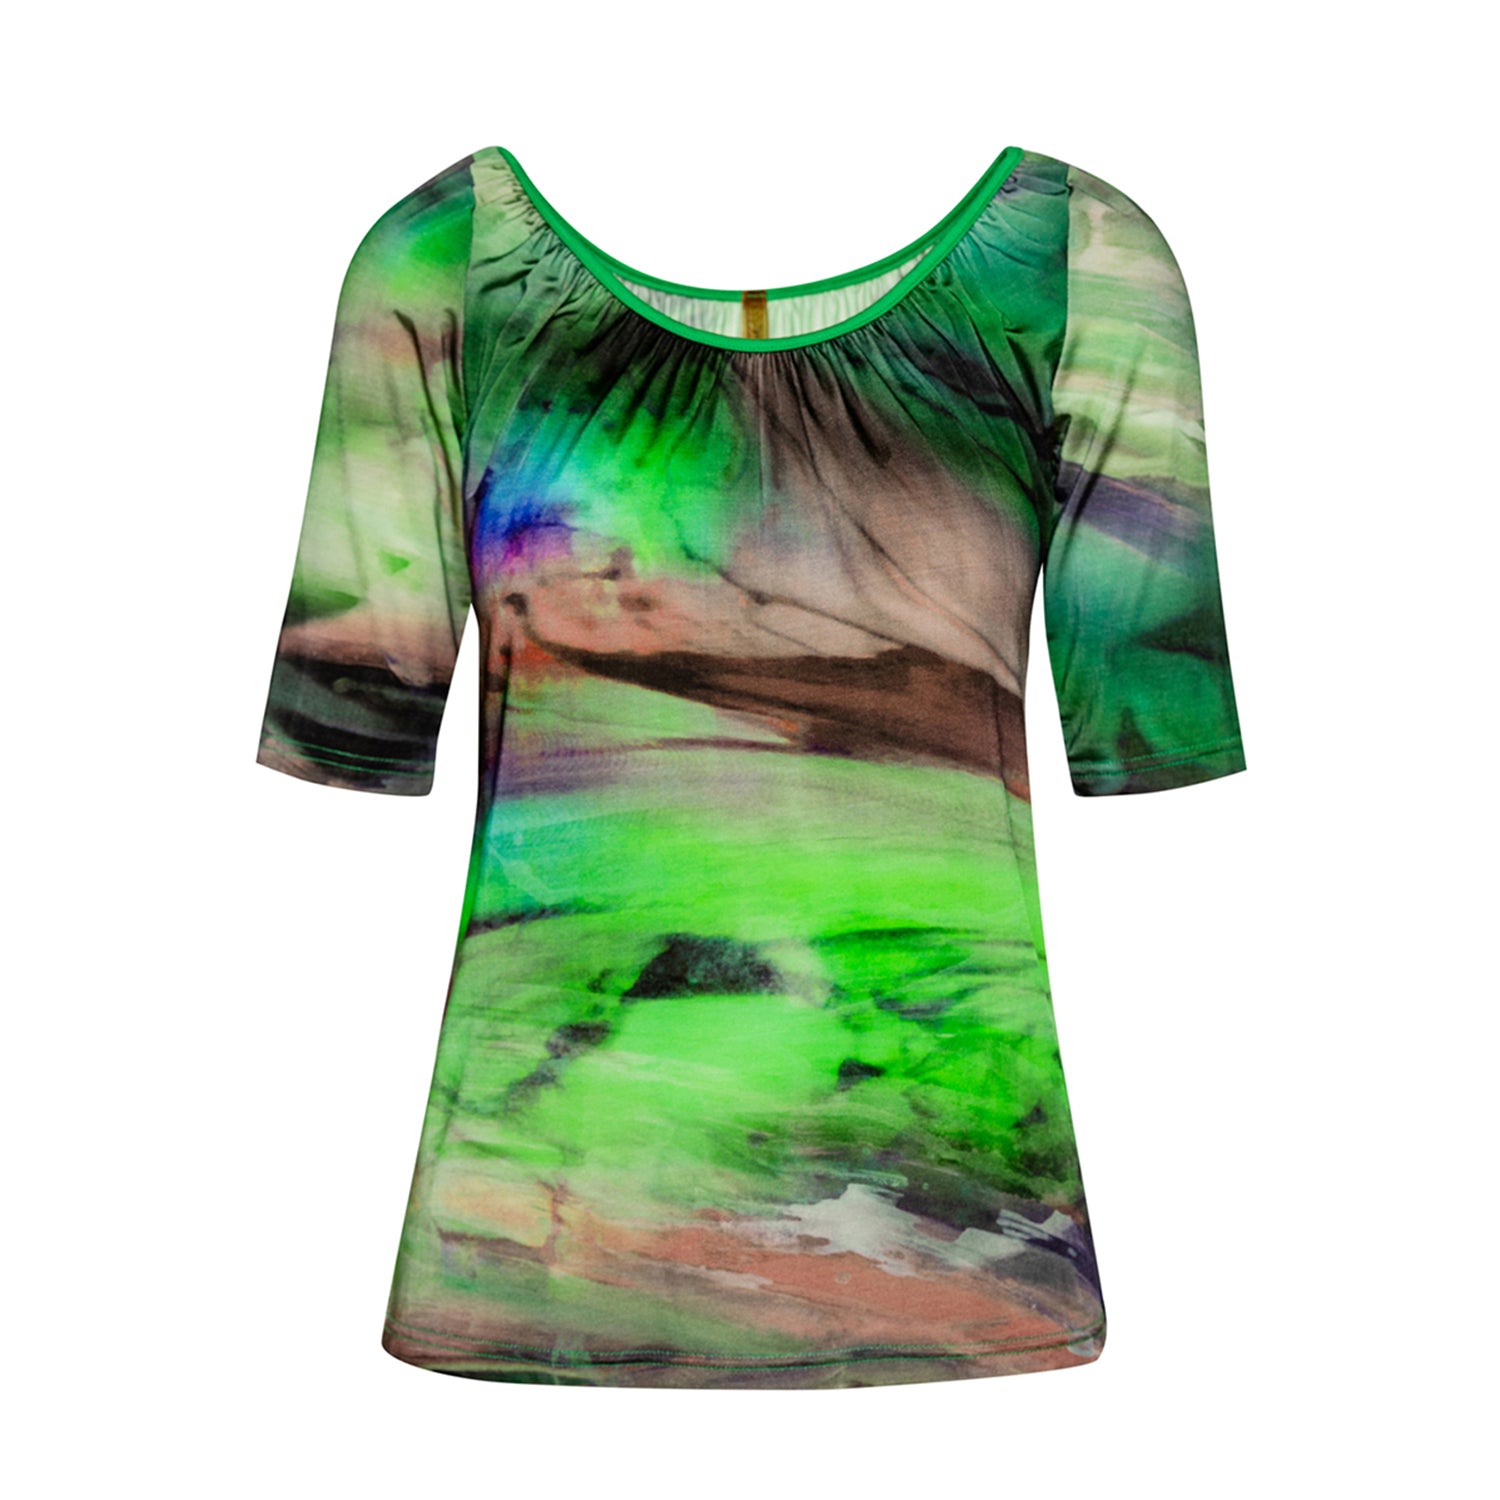 Women’s Green Swirly Print Scoop Neck Top Extra Small Conquista